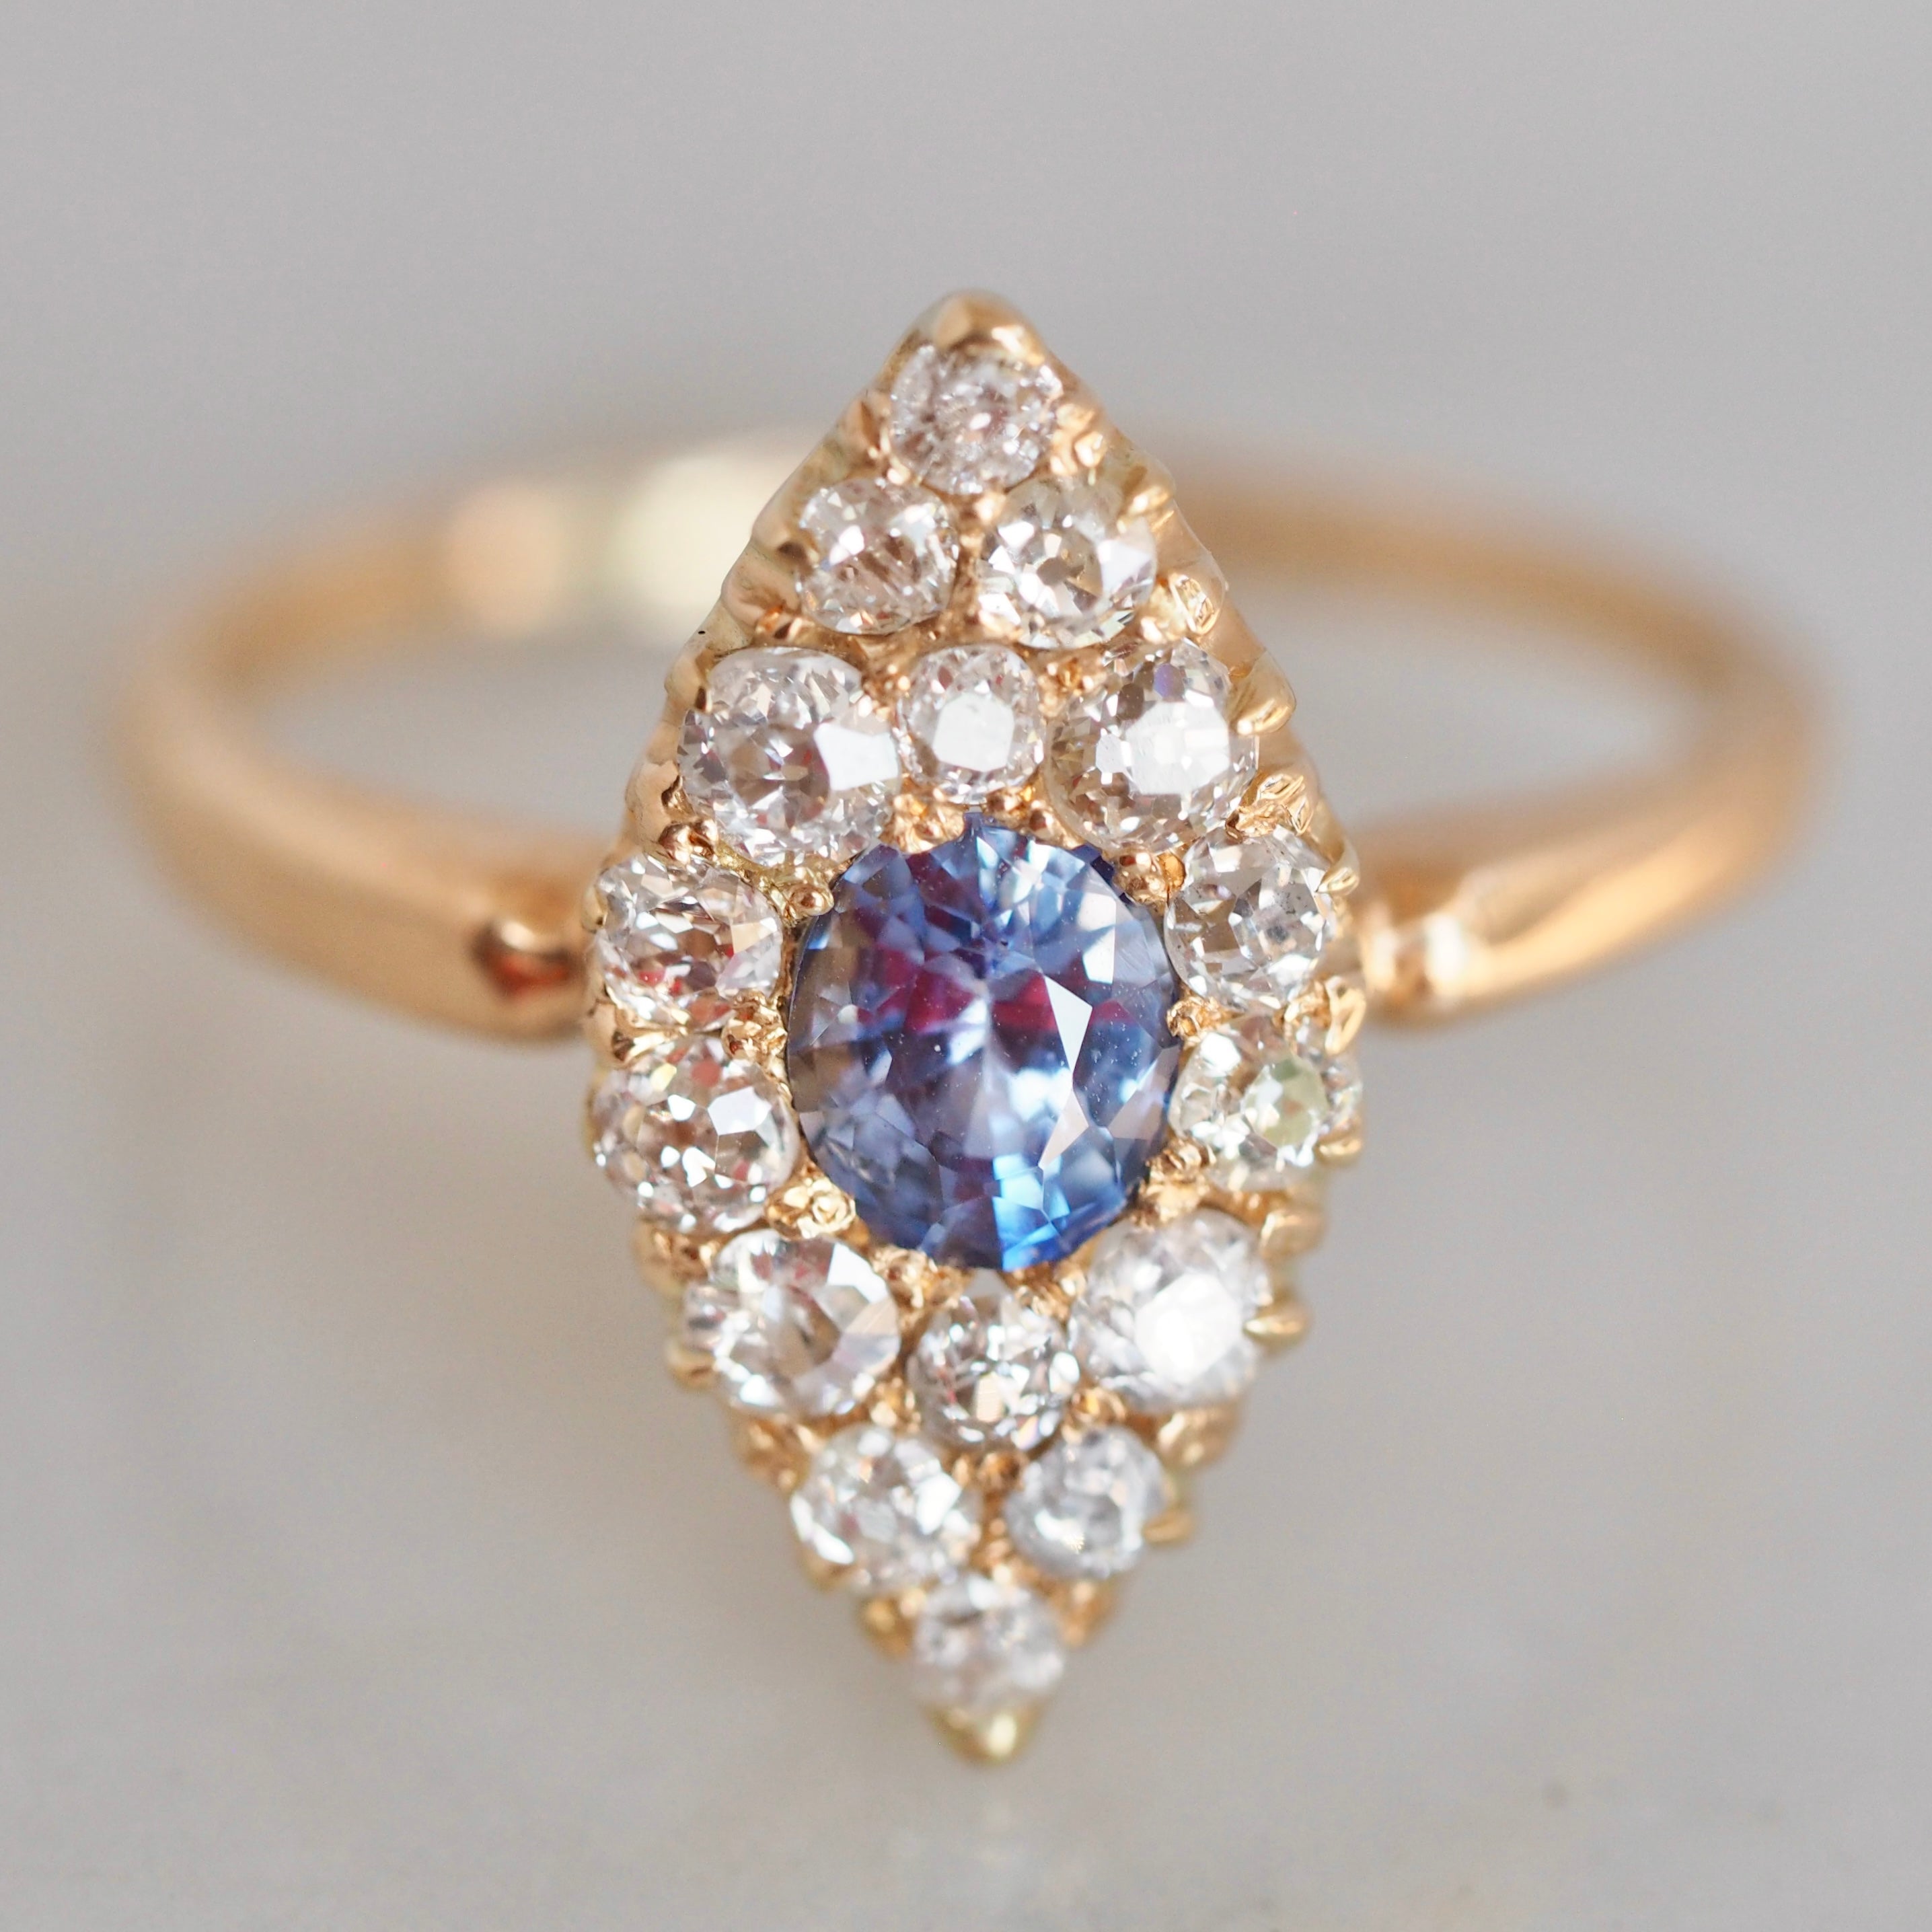 Antique Edwardian 18k Gold Natural Sapphire and Old Mine Cut Diamond Eye Ring